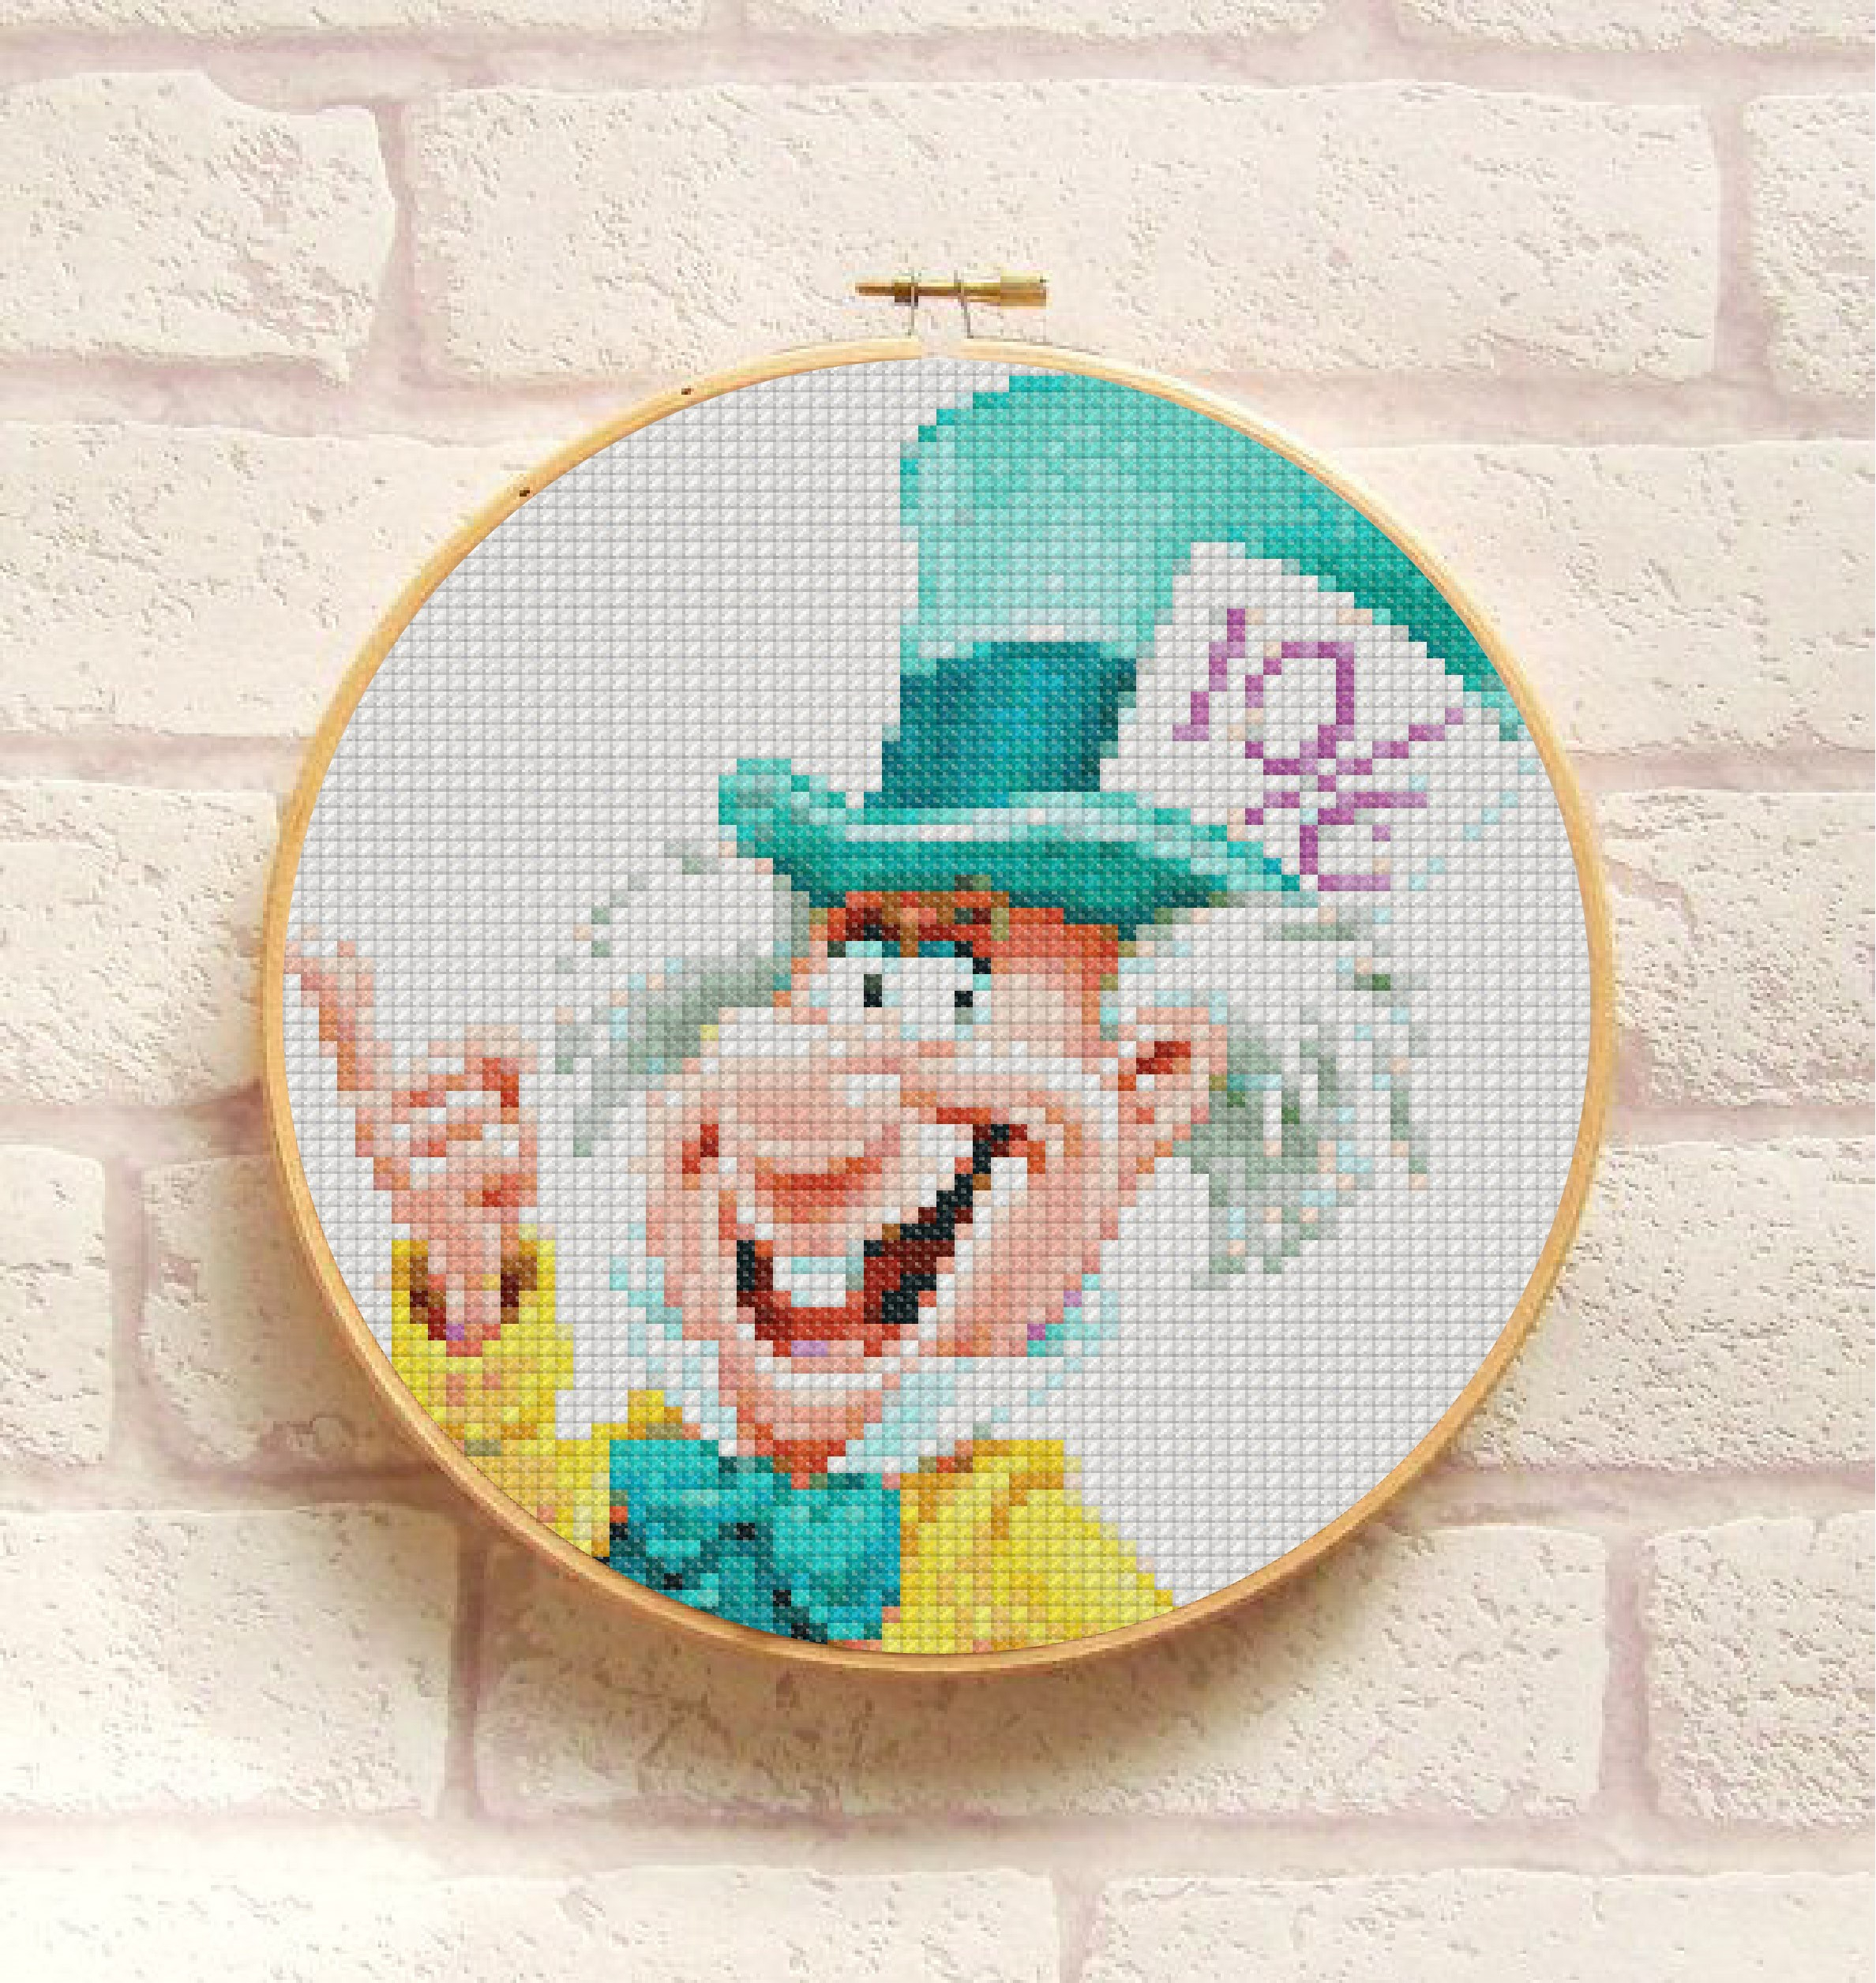 Embroidery Cross Stitch Patterns Mad Hatter Cross Stitch Pattern Pdf Embroidery Cute Nursery Decor Disney Alice Wonderland Counted Cross Stitch Chart Instant Download